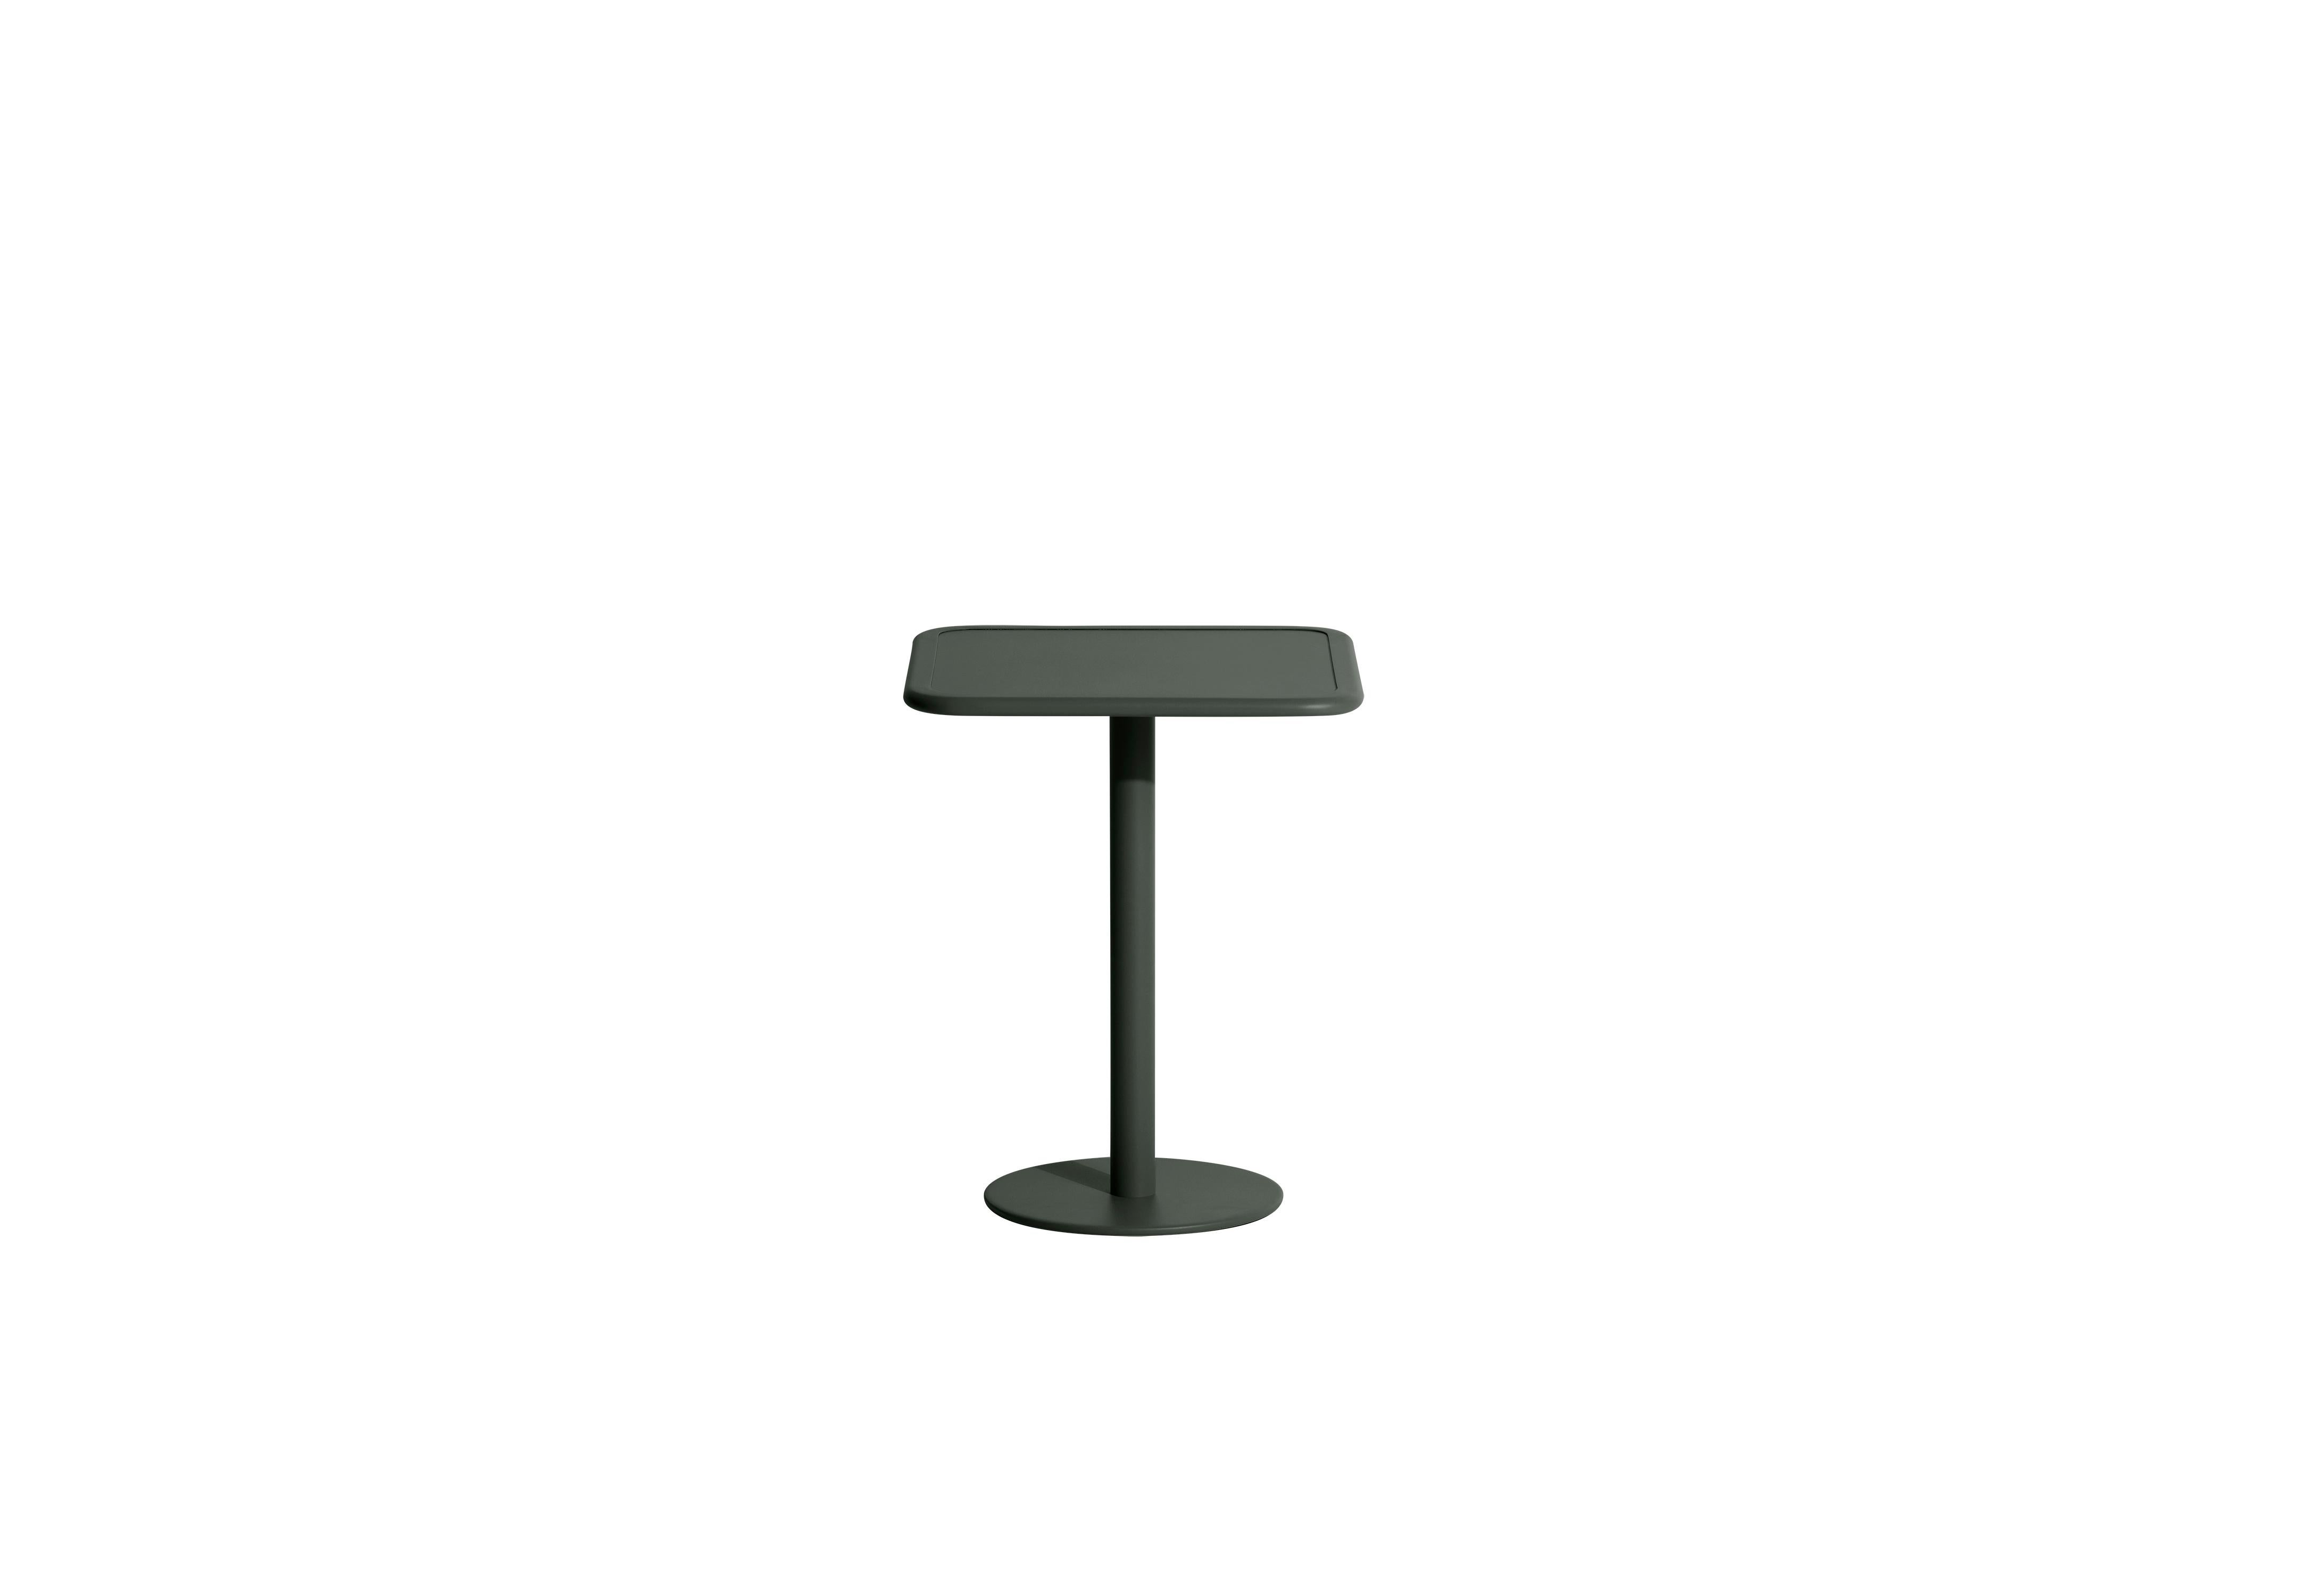 Petite Friture Week-End Bistro Square Dining Table in Glass Green Aluminium by Studio BrichetZiegler, 2017

The week-end collection is a full range of outdoor furniture, in aluminium grained epoxy paint, matt finish, that includes 18 functions and